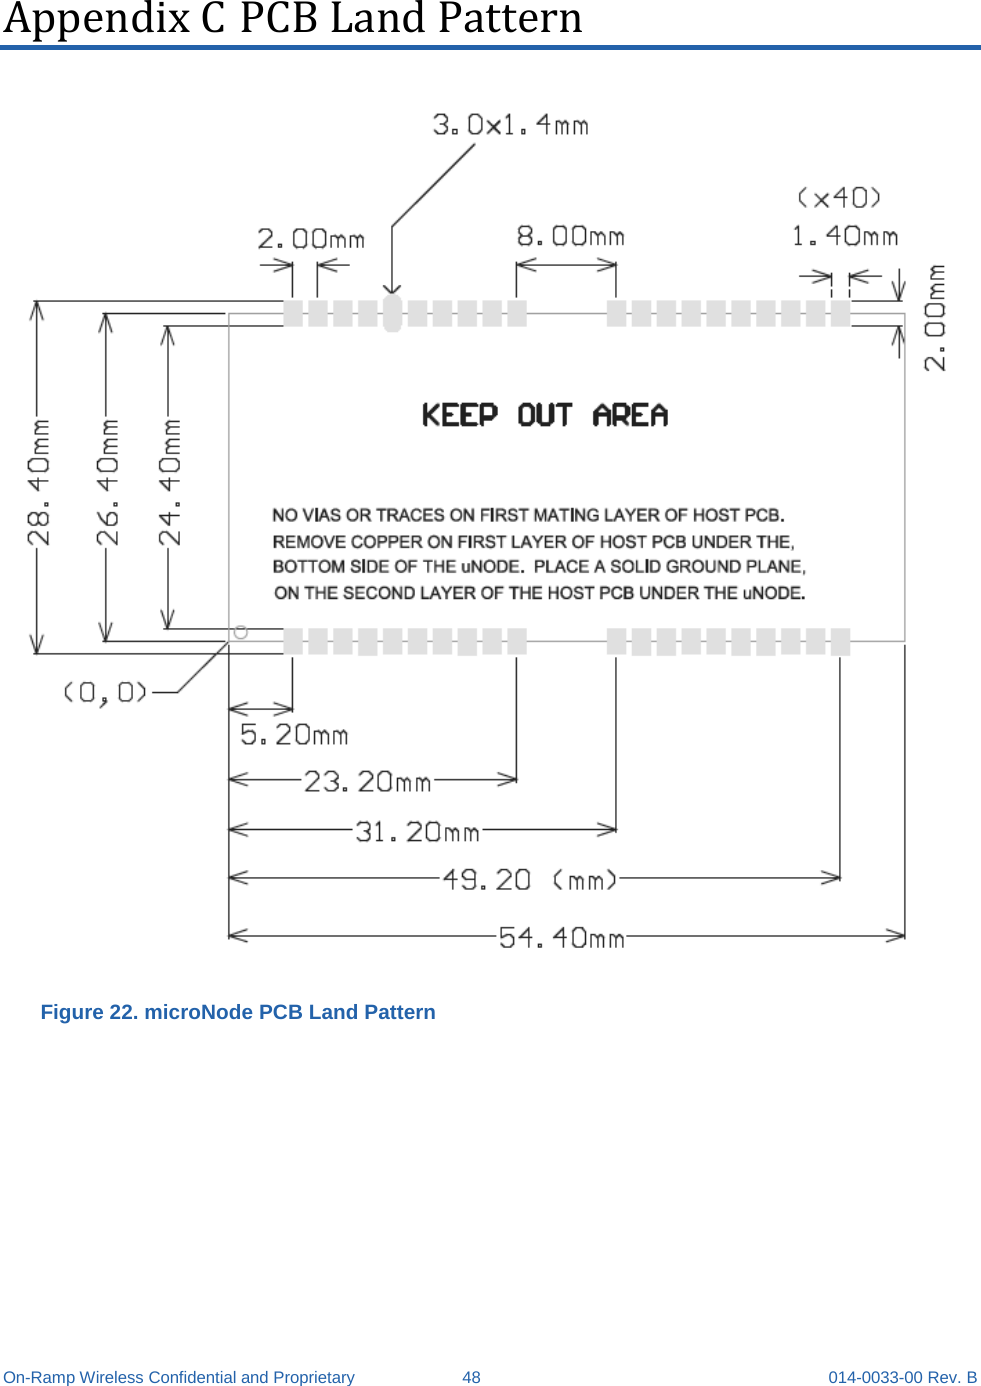  On-Ramp Wireless Confidential and Proprietary 48 014-0033-00 Rev. B Appendix C PCB Land Pattern  Figure 22. microNode PCB Land Pattern  